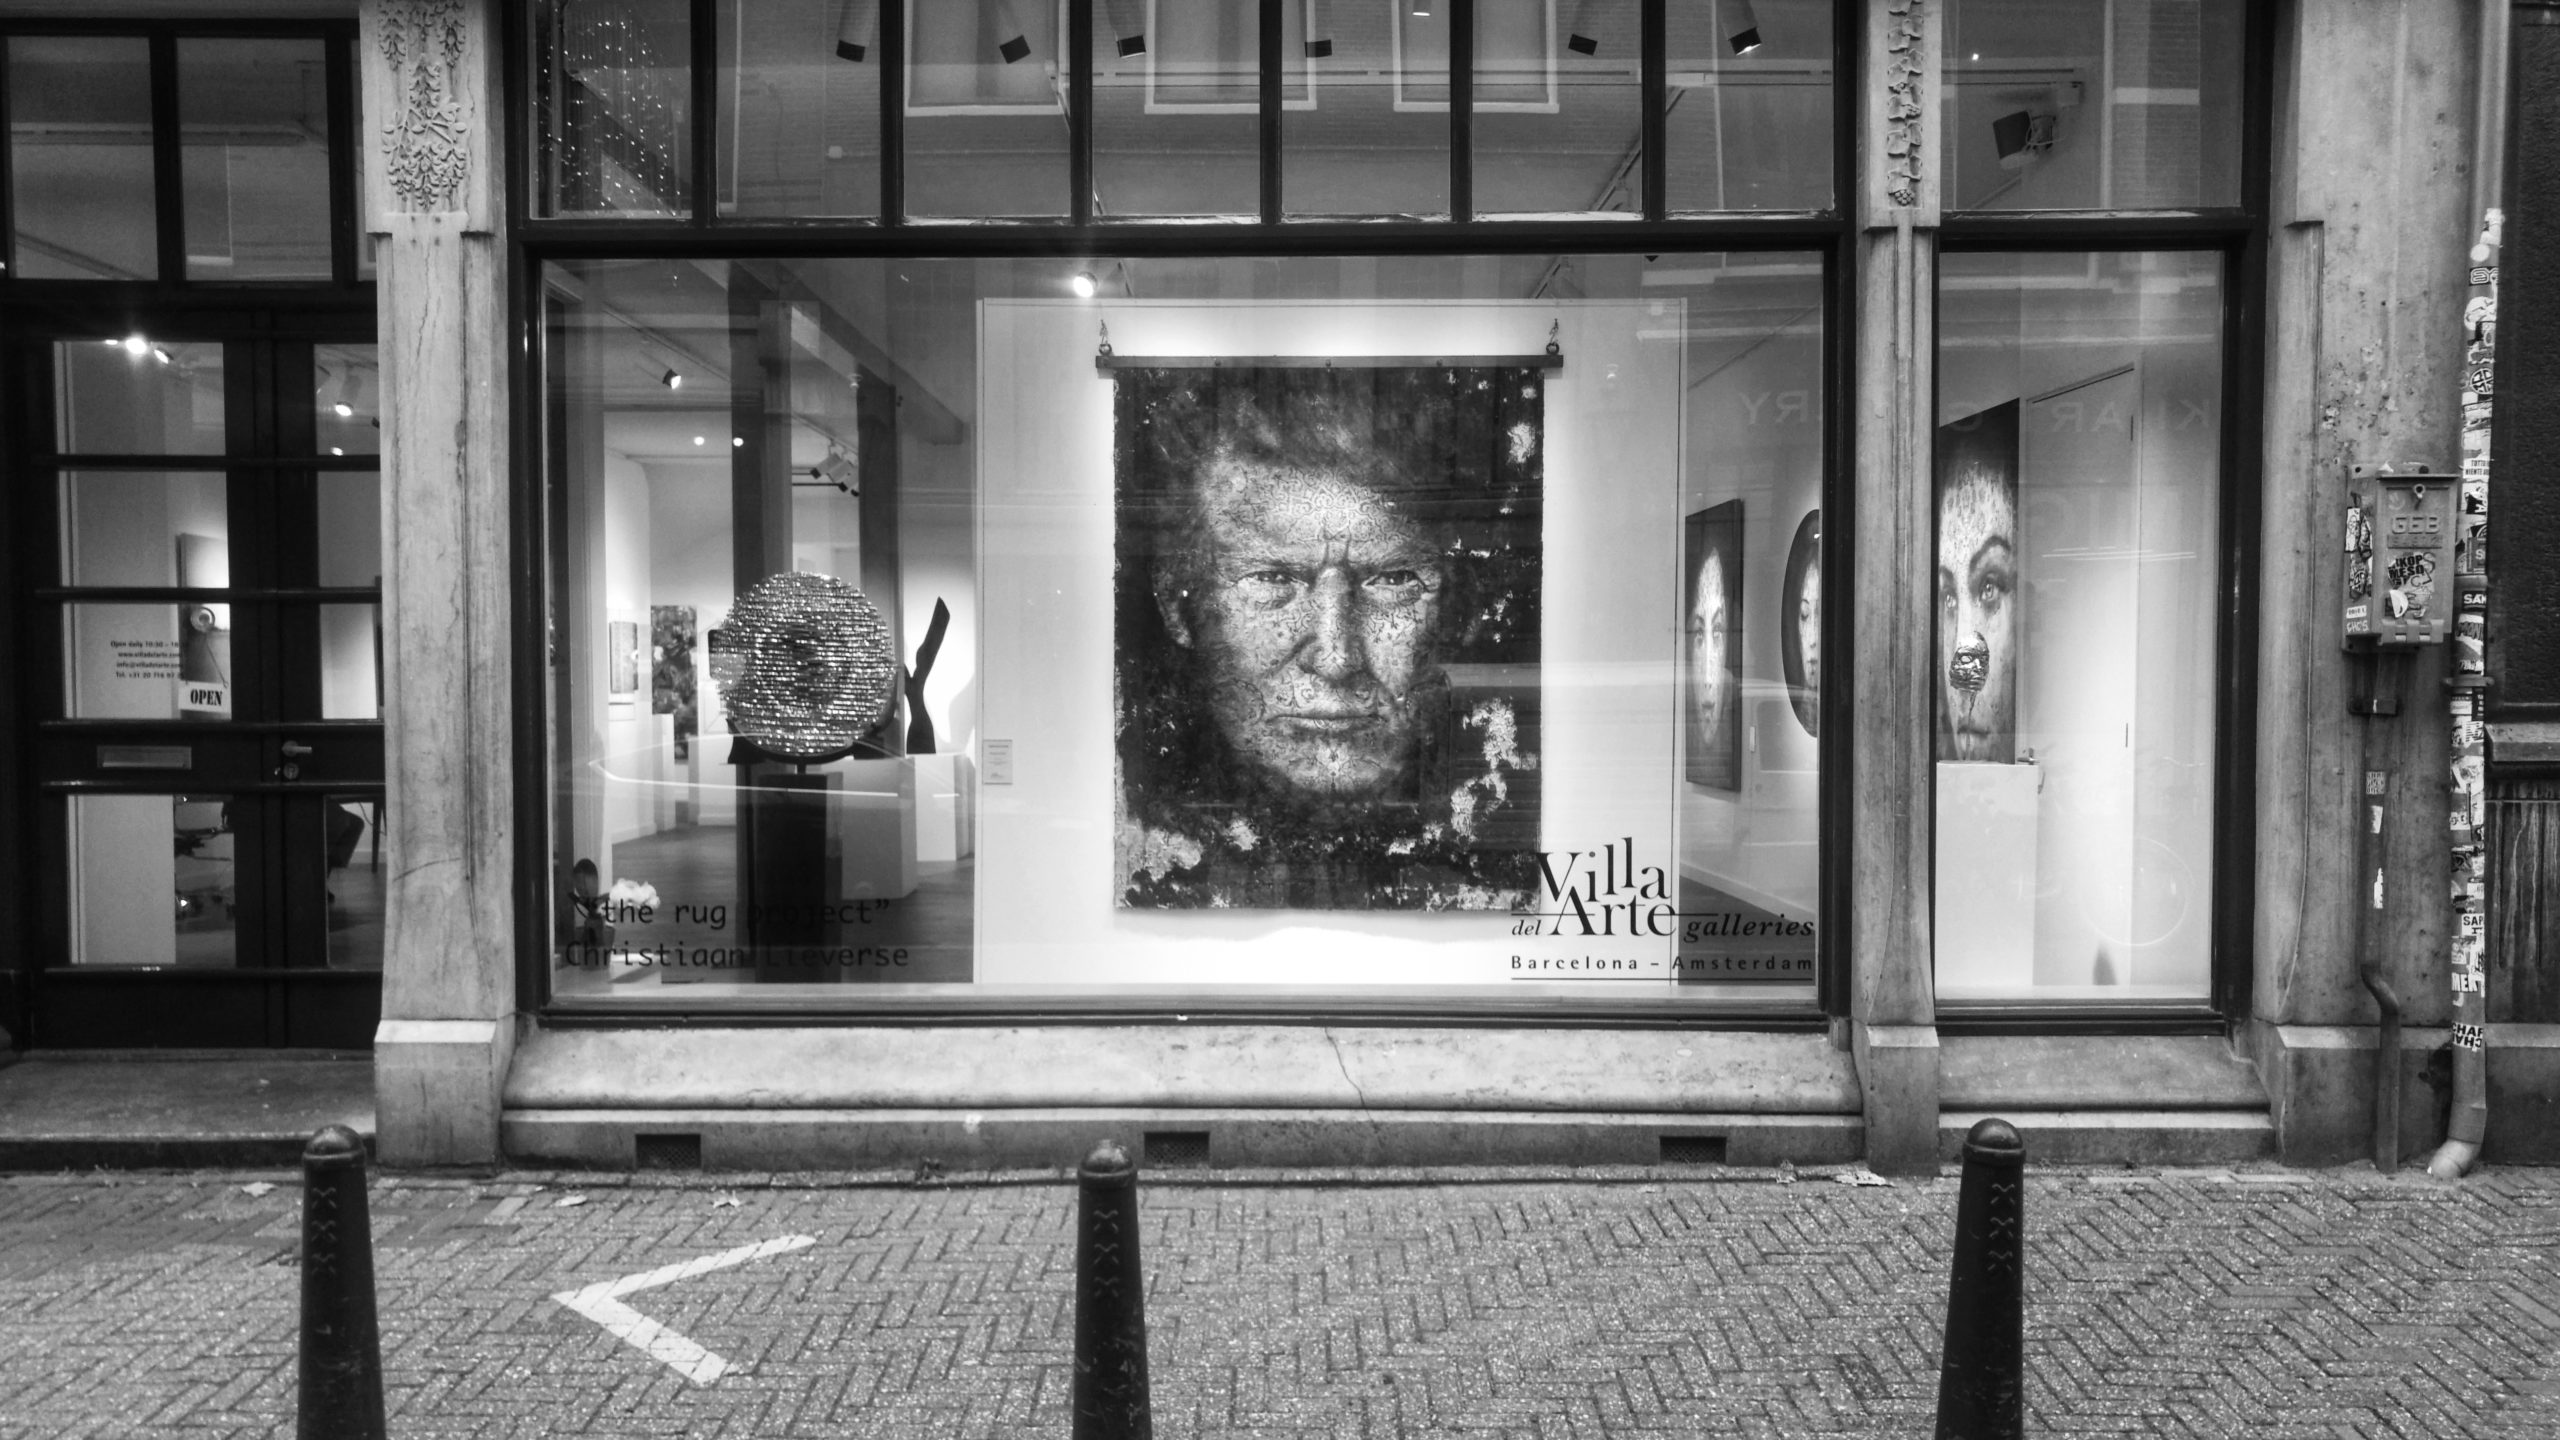 Donald Trump looking at you directly and intensely from behind an Amsterdam window